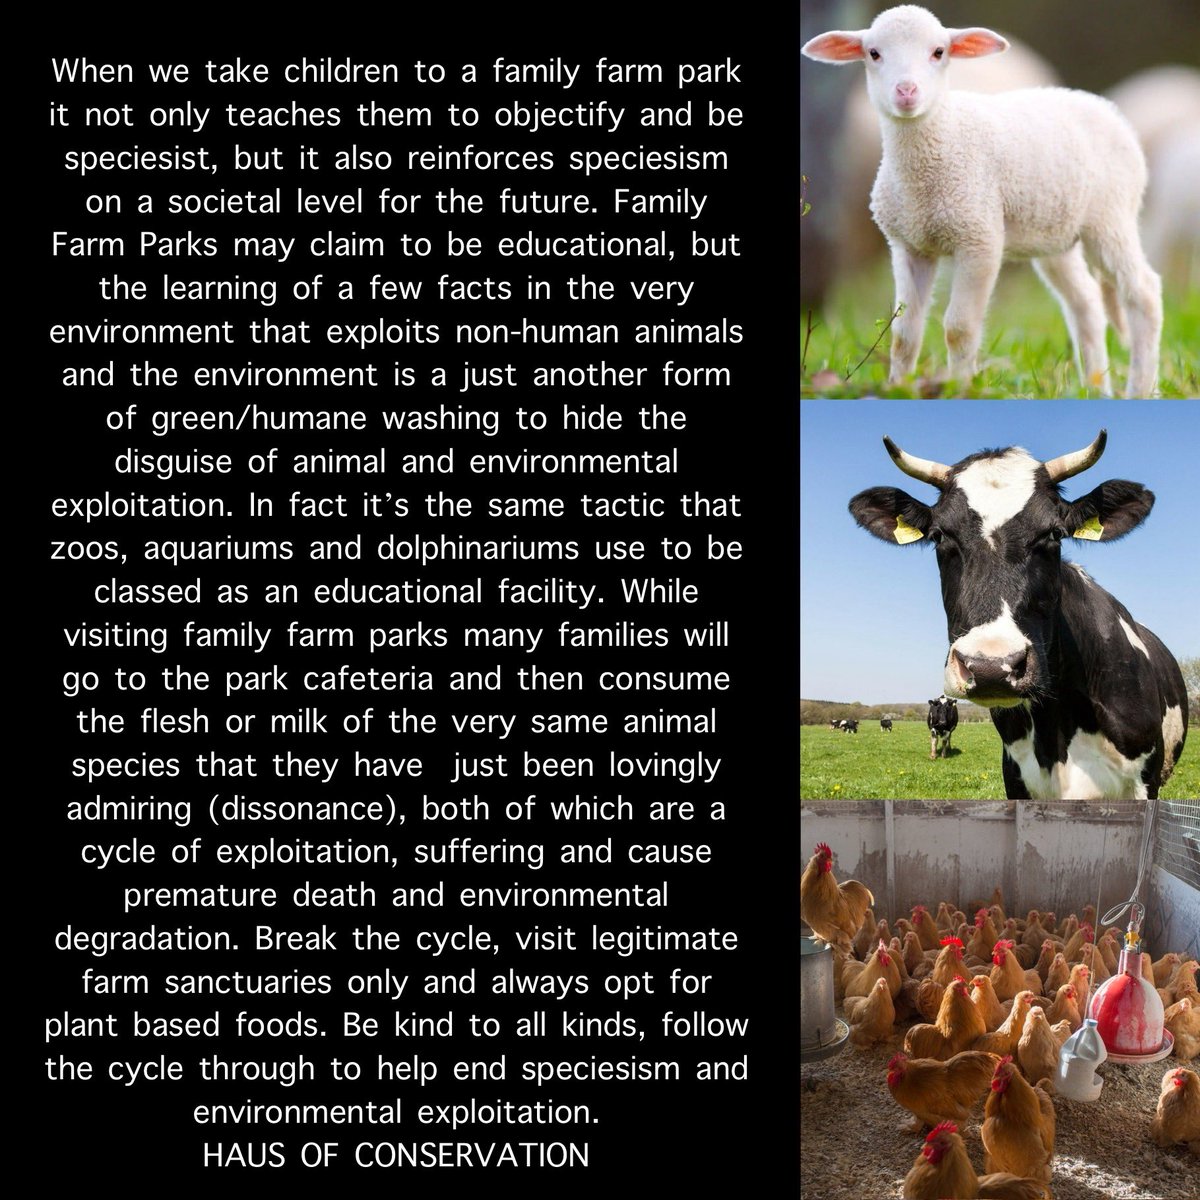 Family Farm Parks hosting Eco activities ❌ Its a bit like an oil company teaching us about climate change. It's green and humane washing. HAUS OF CONSERVATION

#bekindtoallkinds #cow #lamb #chicken  #familyfarmpark #farmpark #farm #environment #speciesism